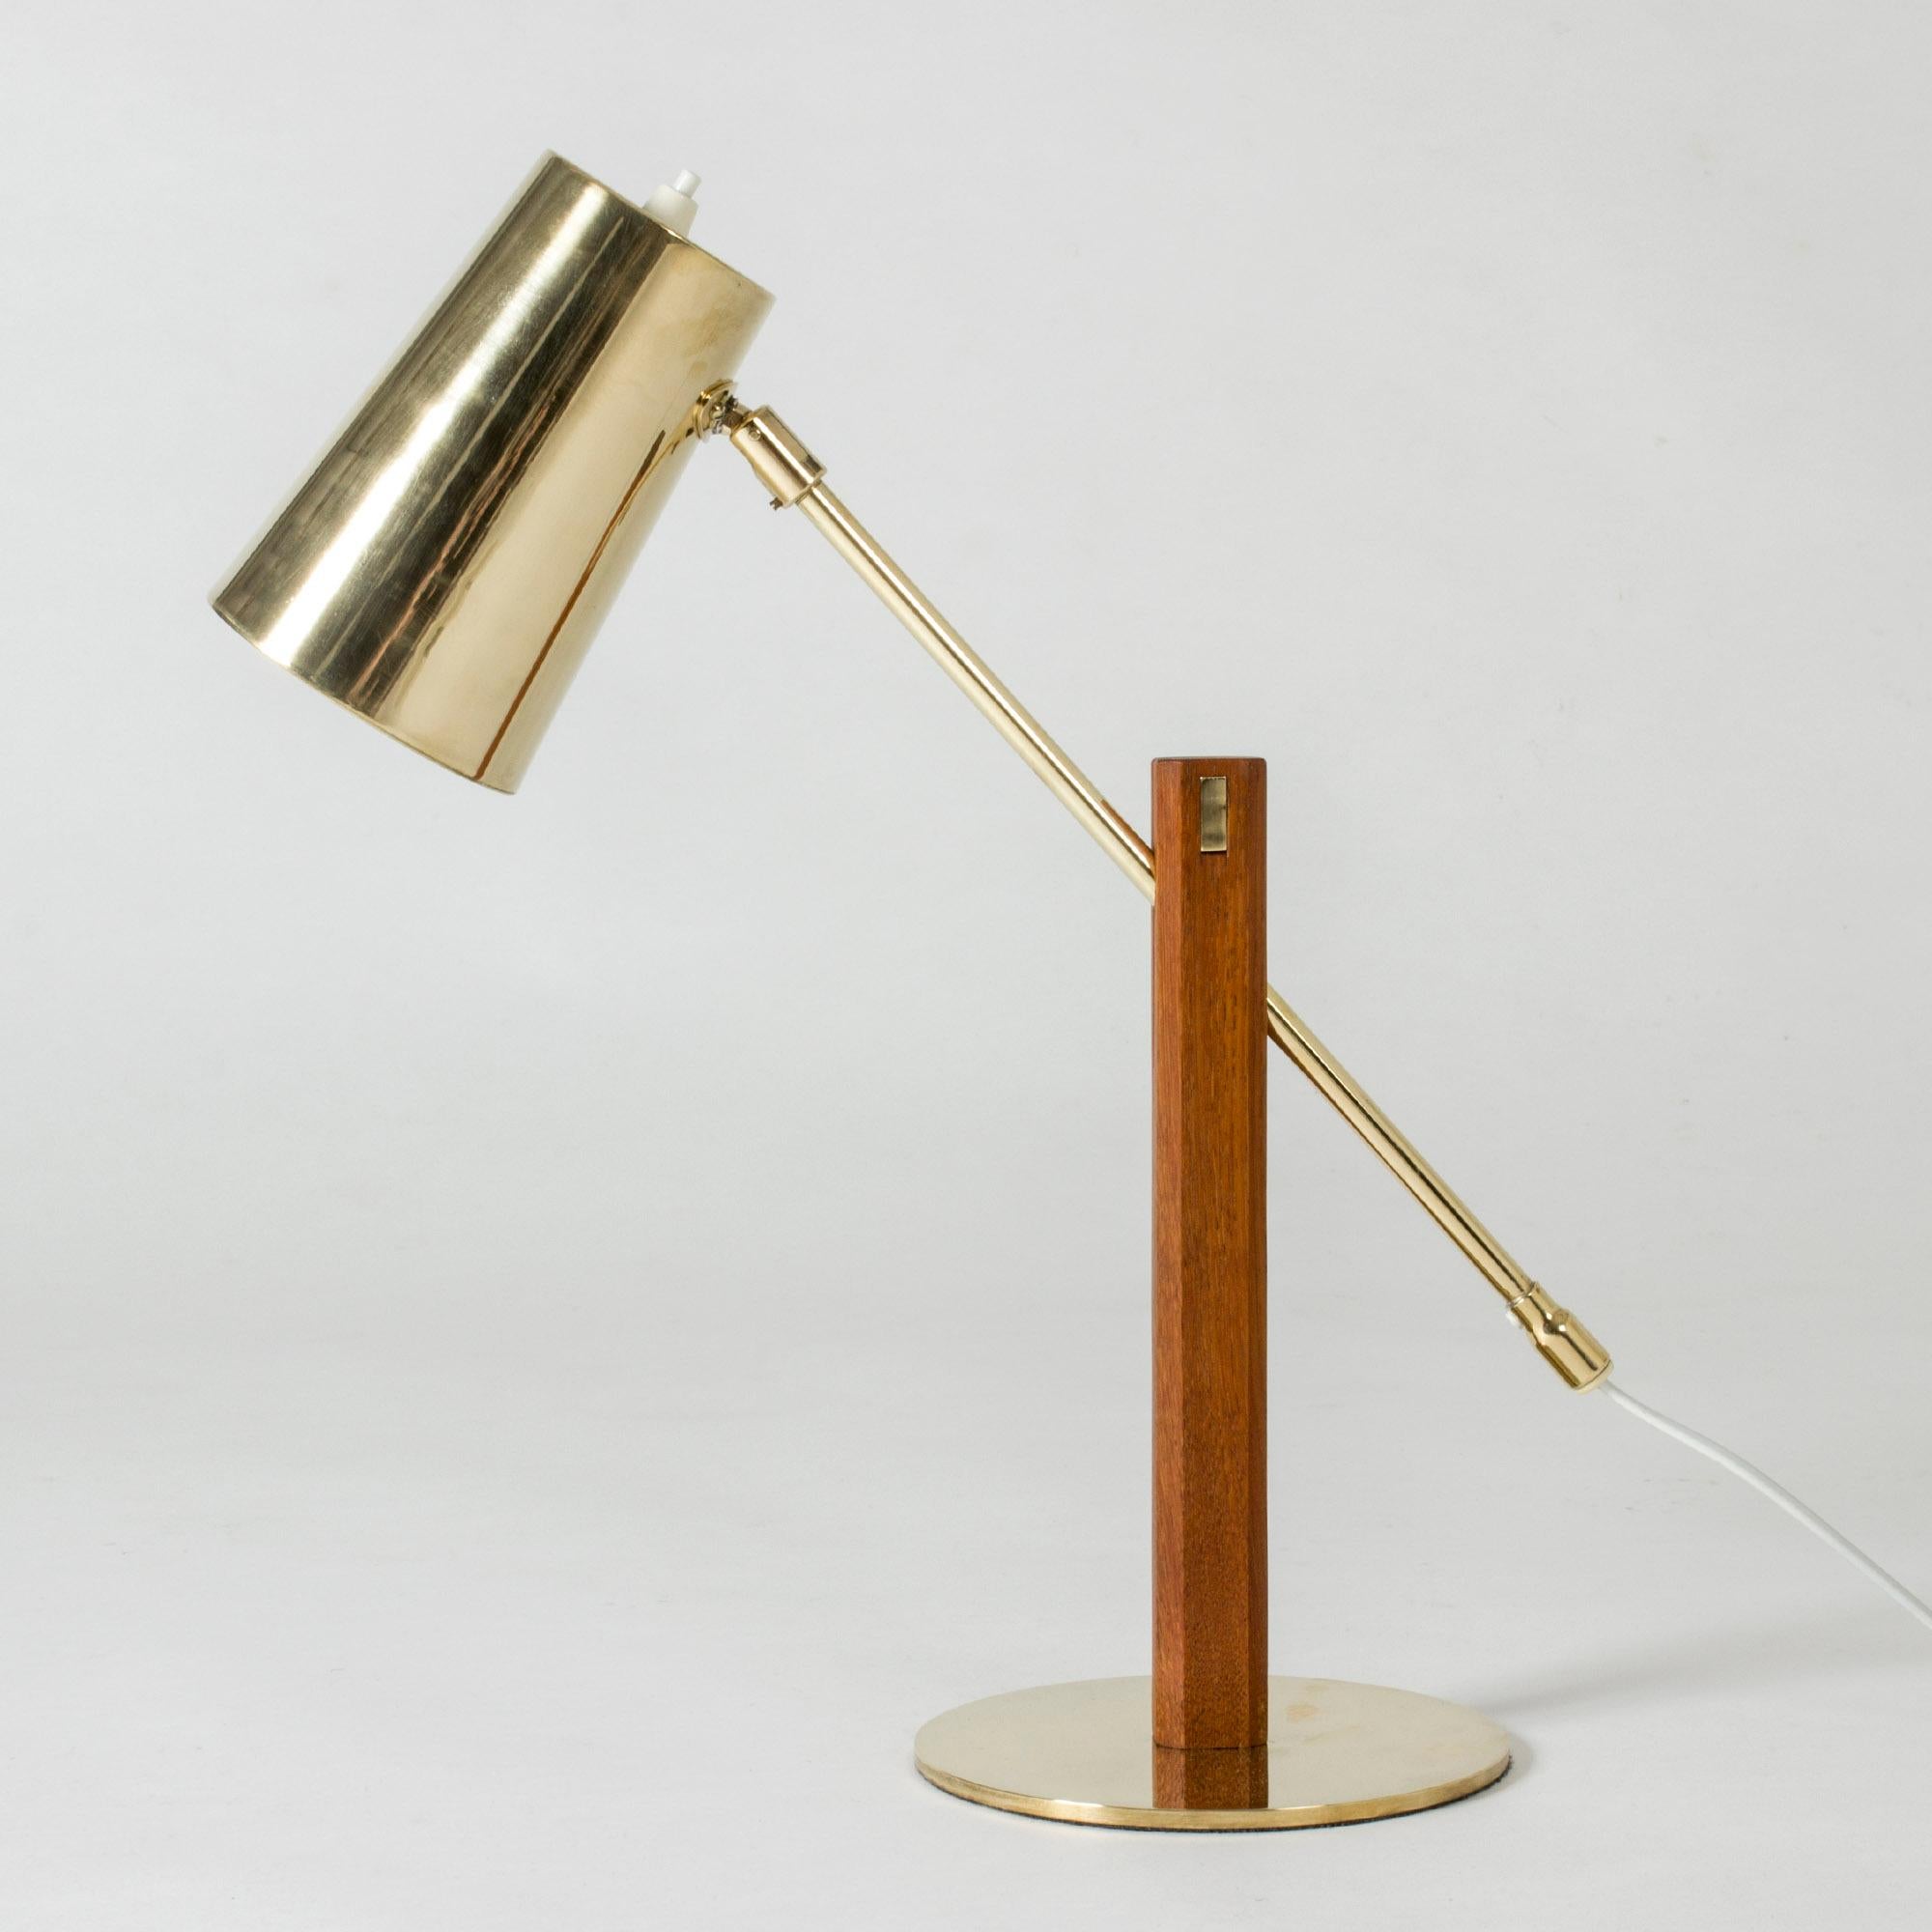 Brass table lamp with a teak handle by Hans Bergström. Adjustable angle of the lamp shade, amazing details.